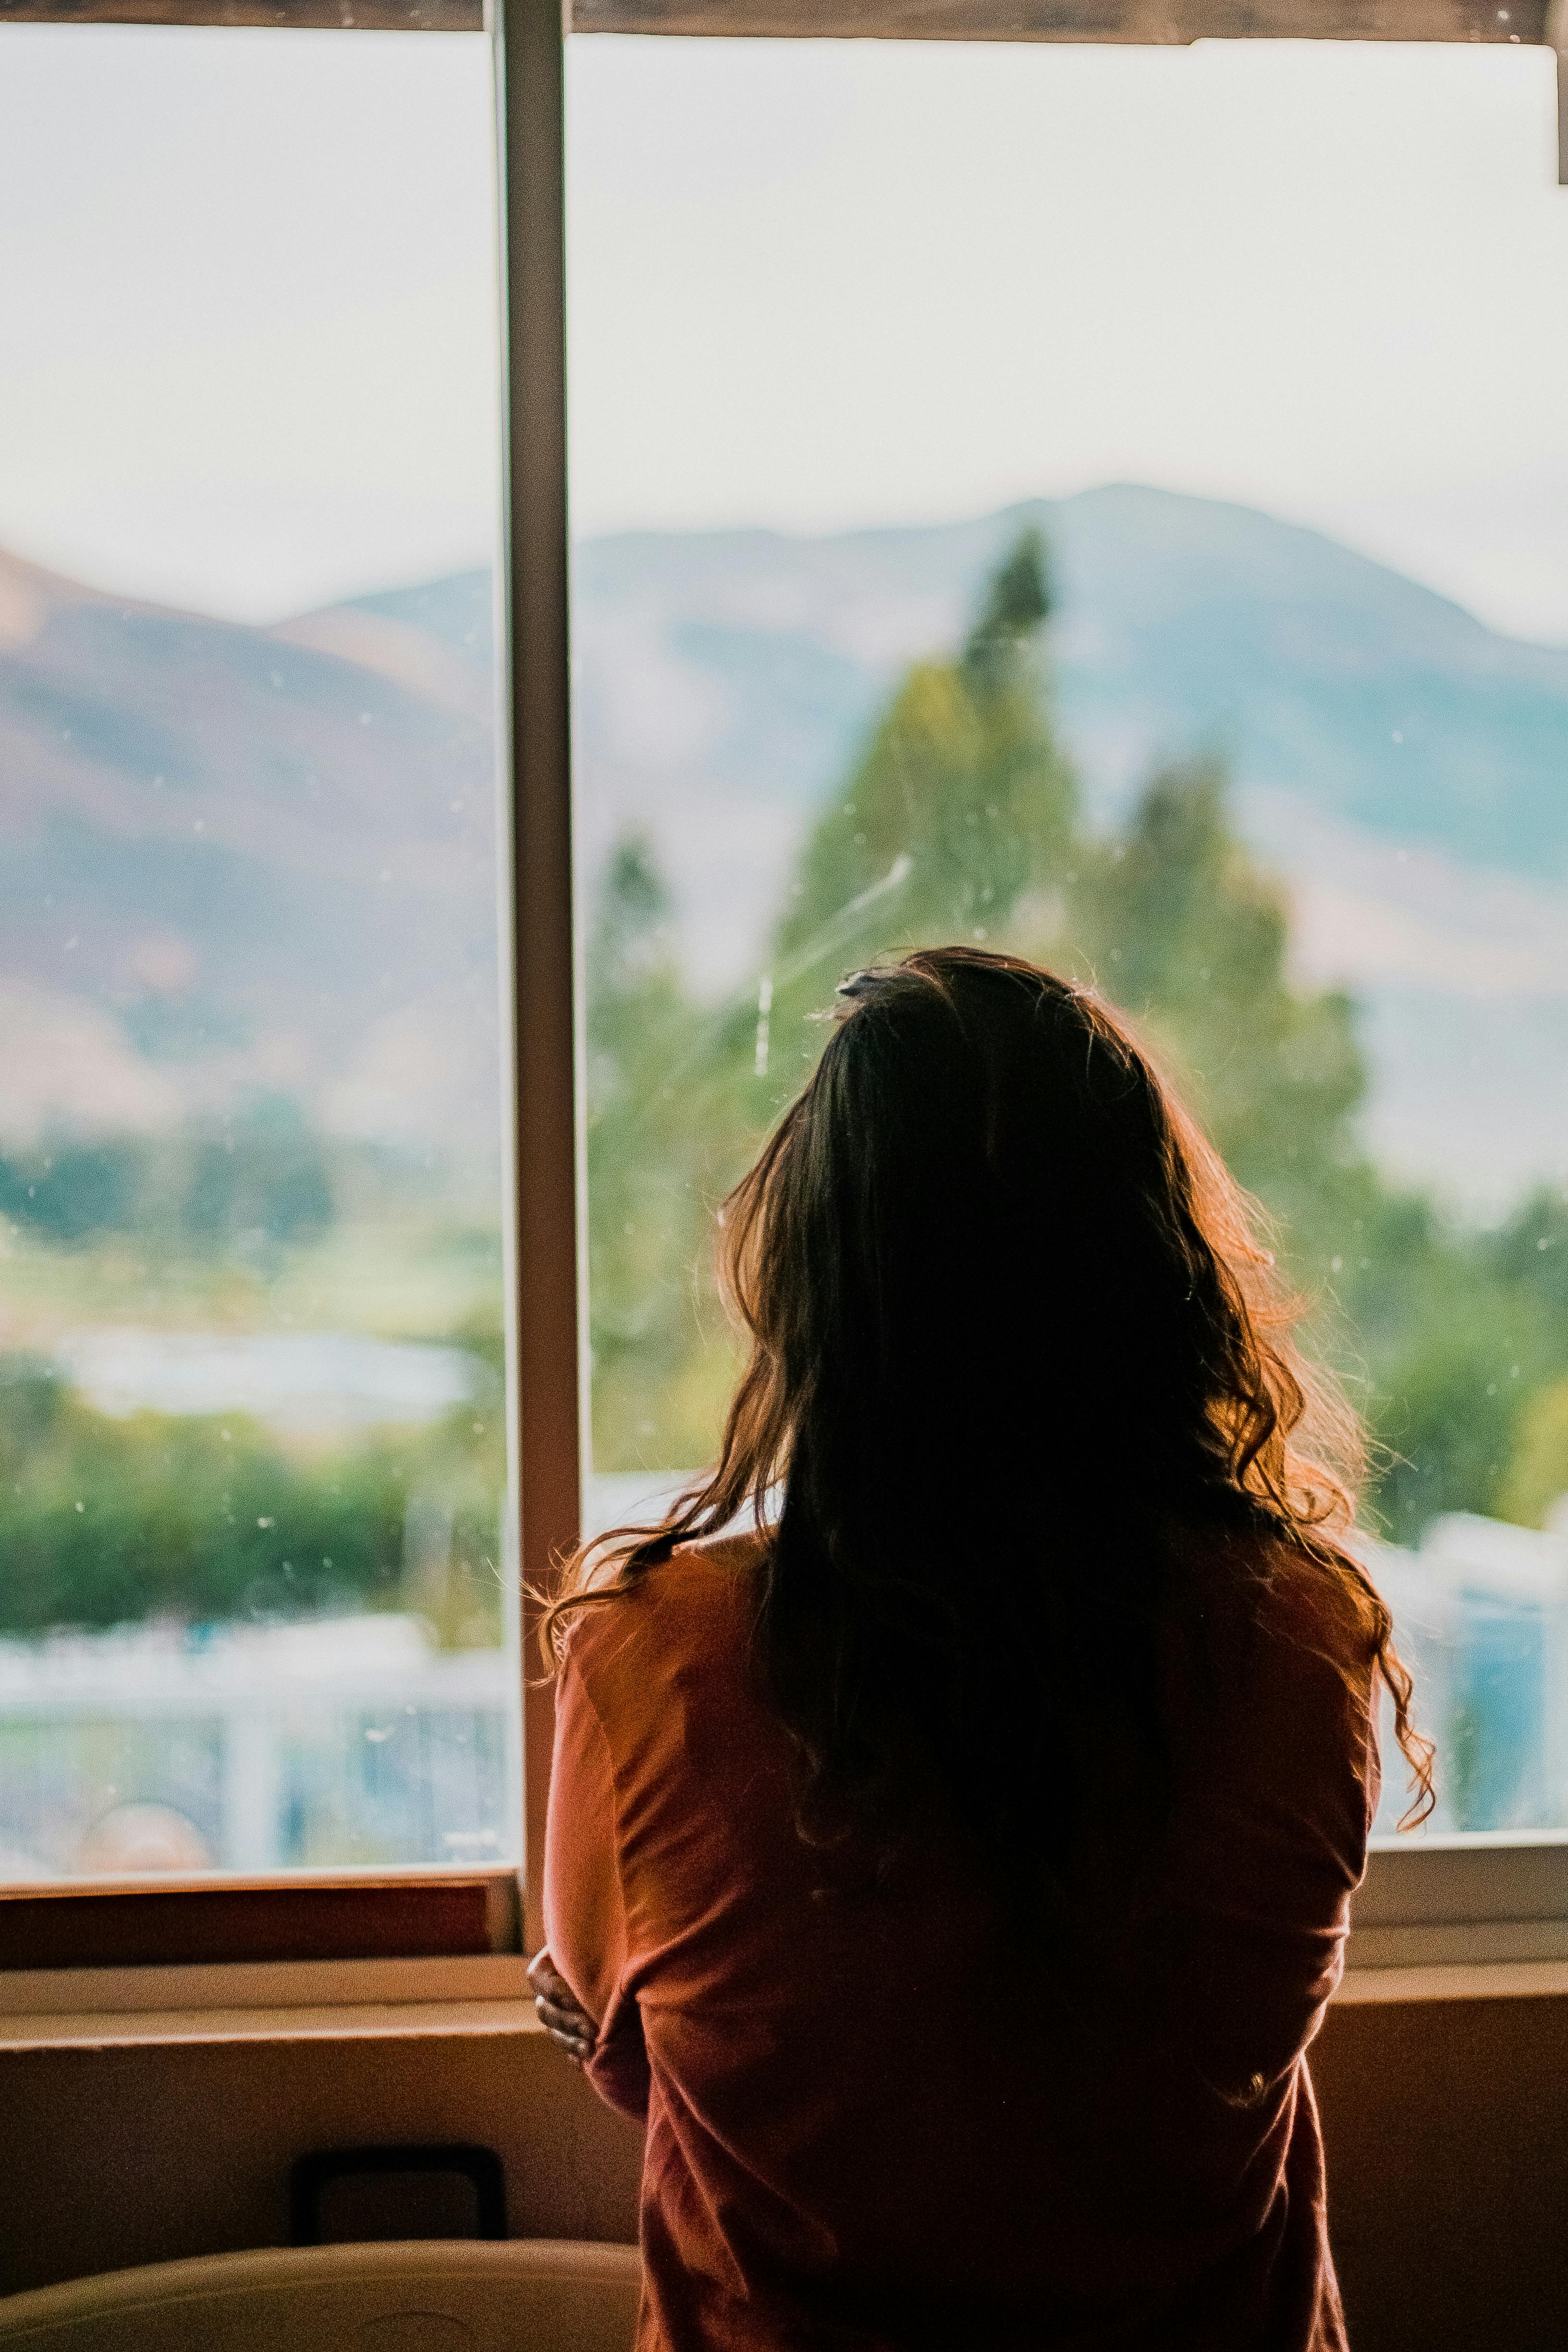 Sad woman in front of a window | Source: Pexels